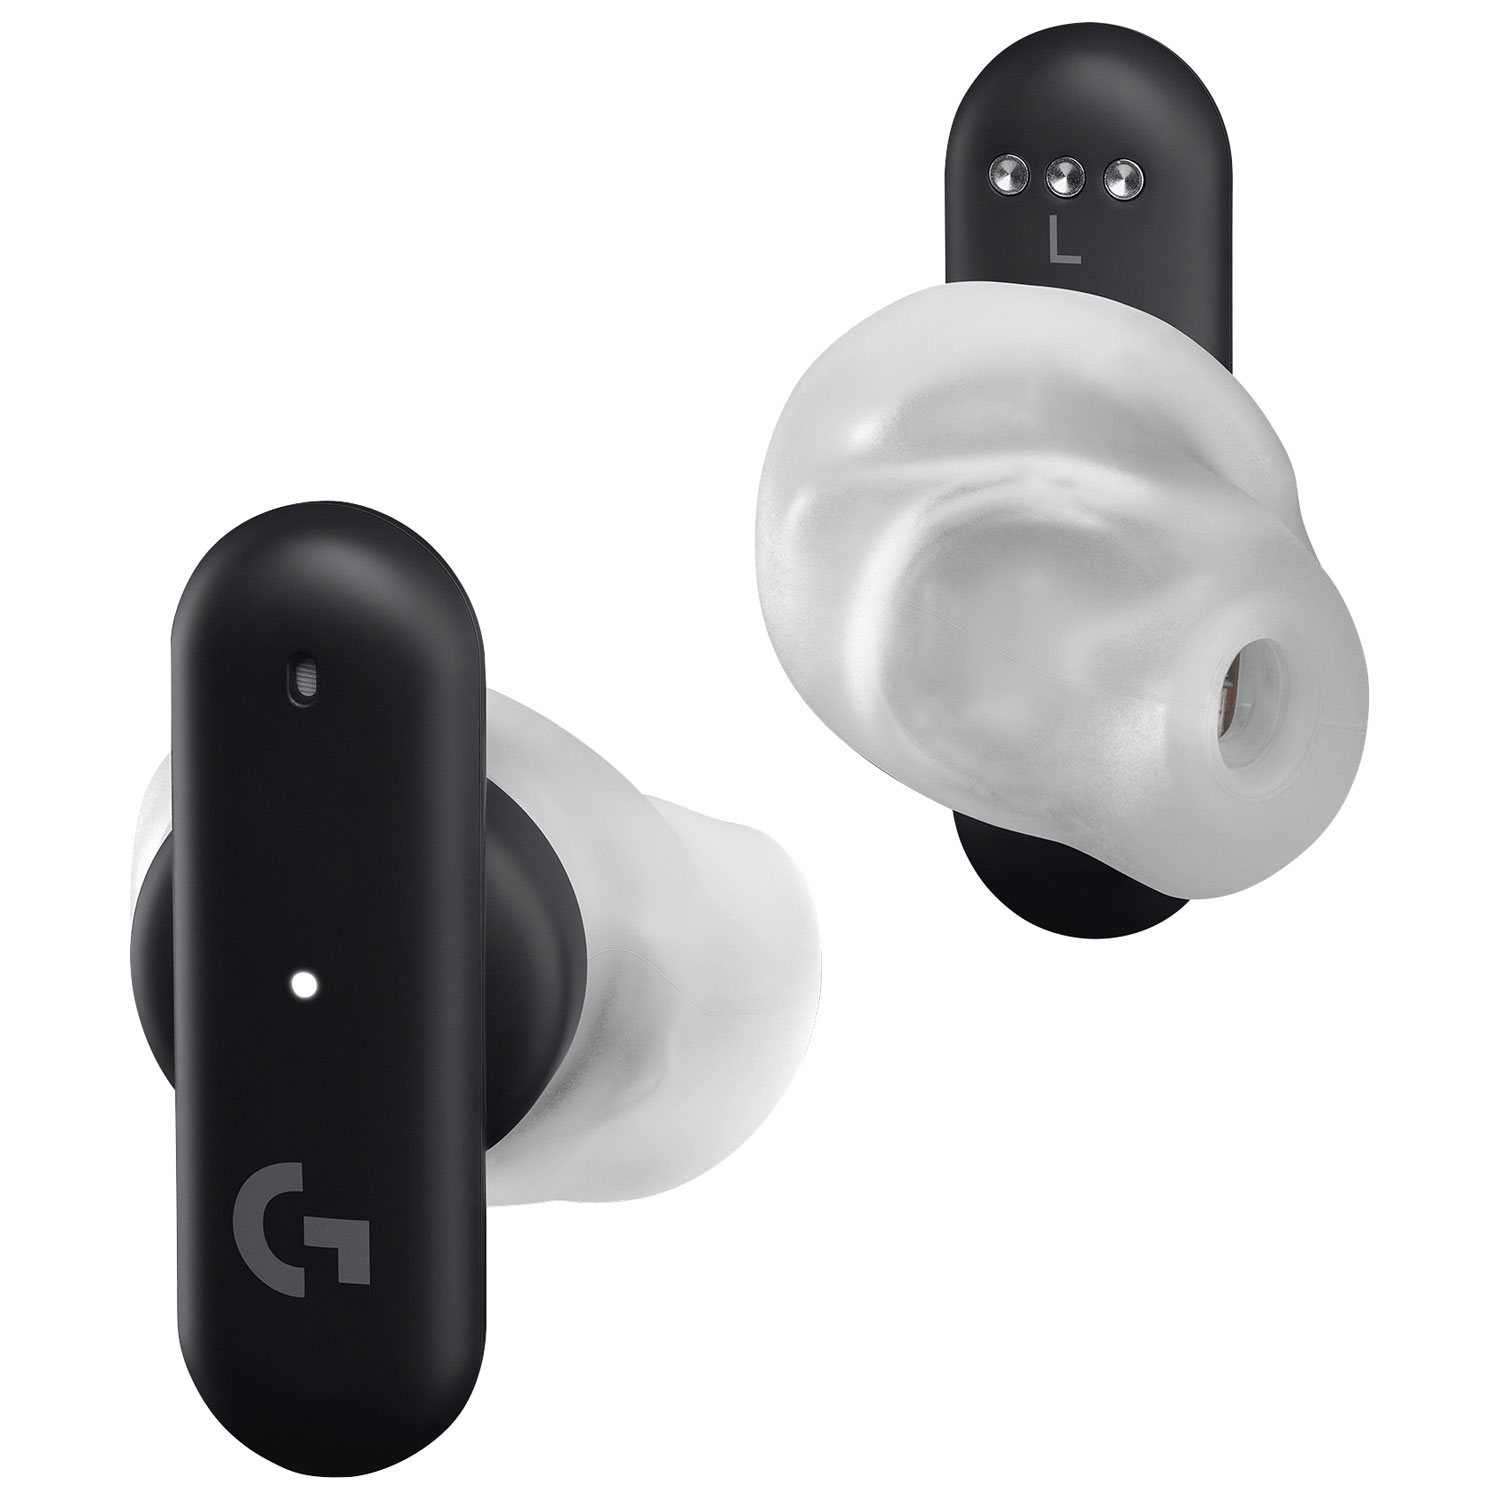 Logitech G FITS In-Ear Sound Isolating Truly Wireless Headphones - Black